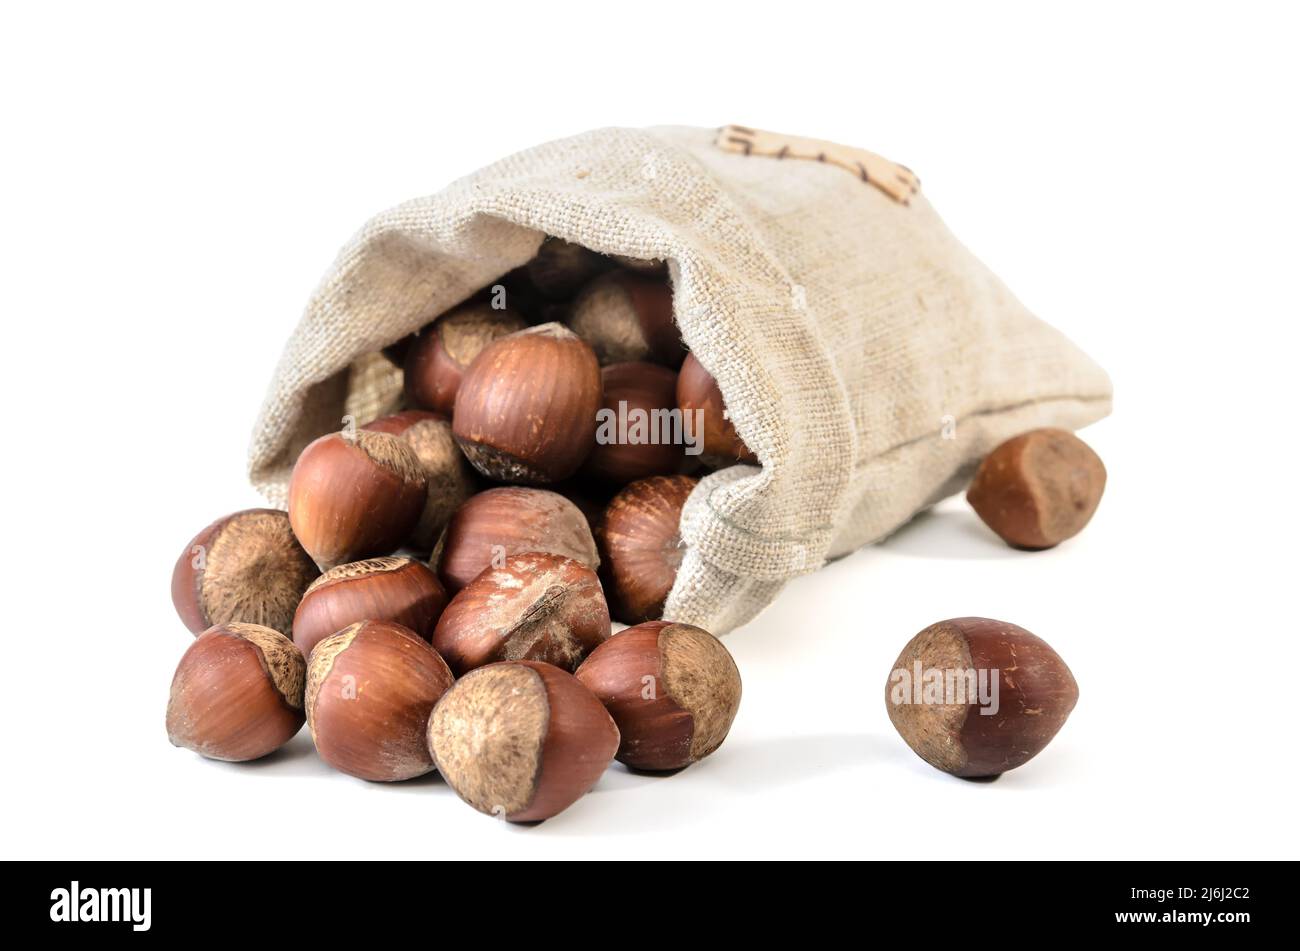 hazelnuts in a woven bag on a white background with soft shadow Stock Photo